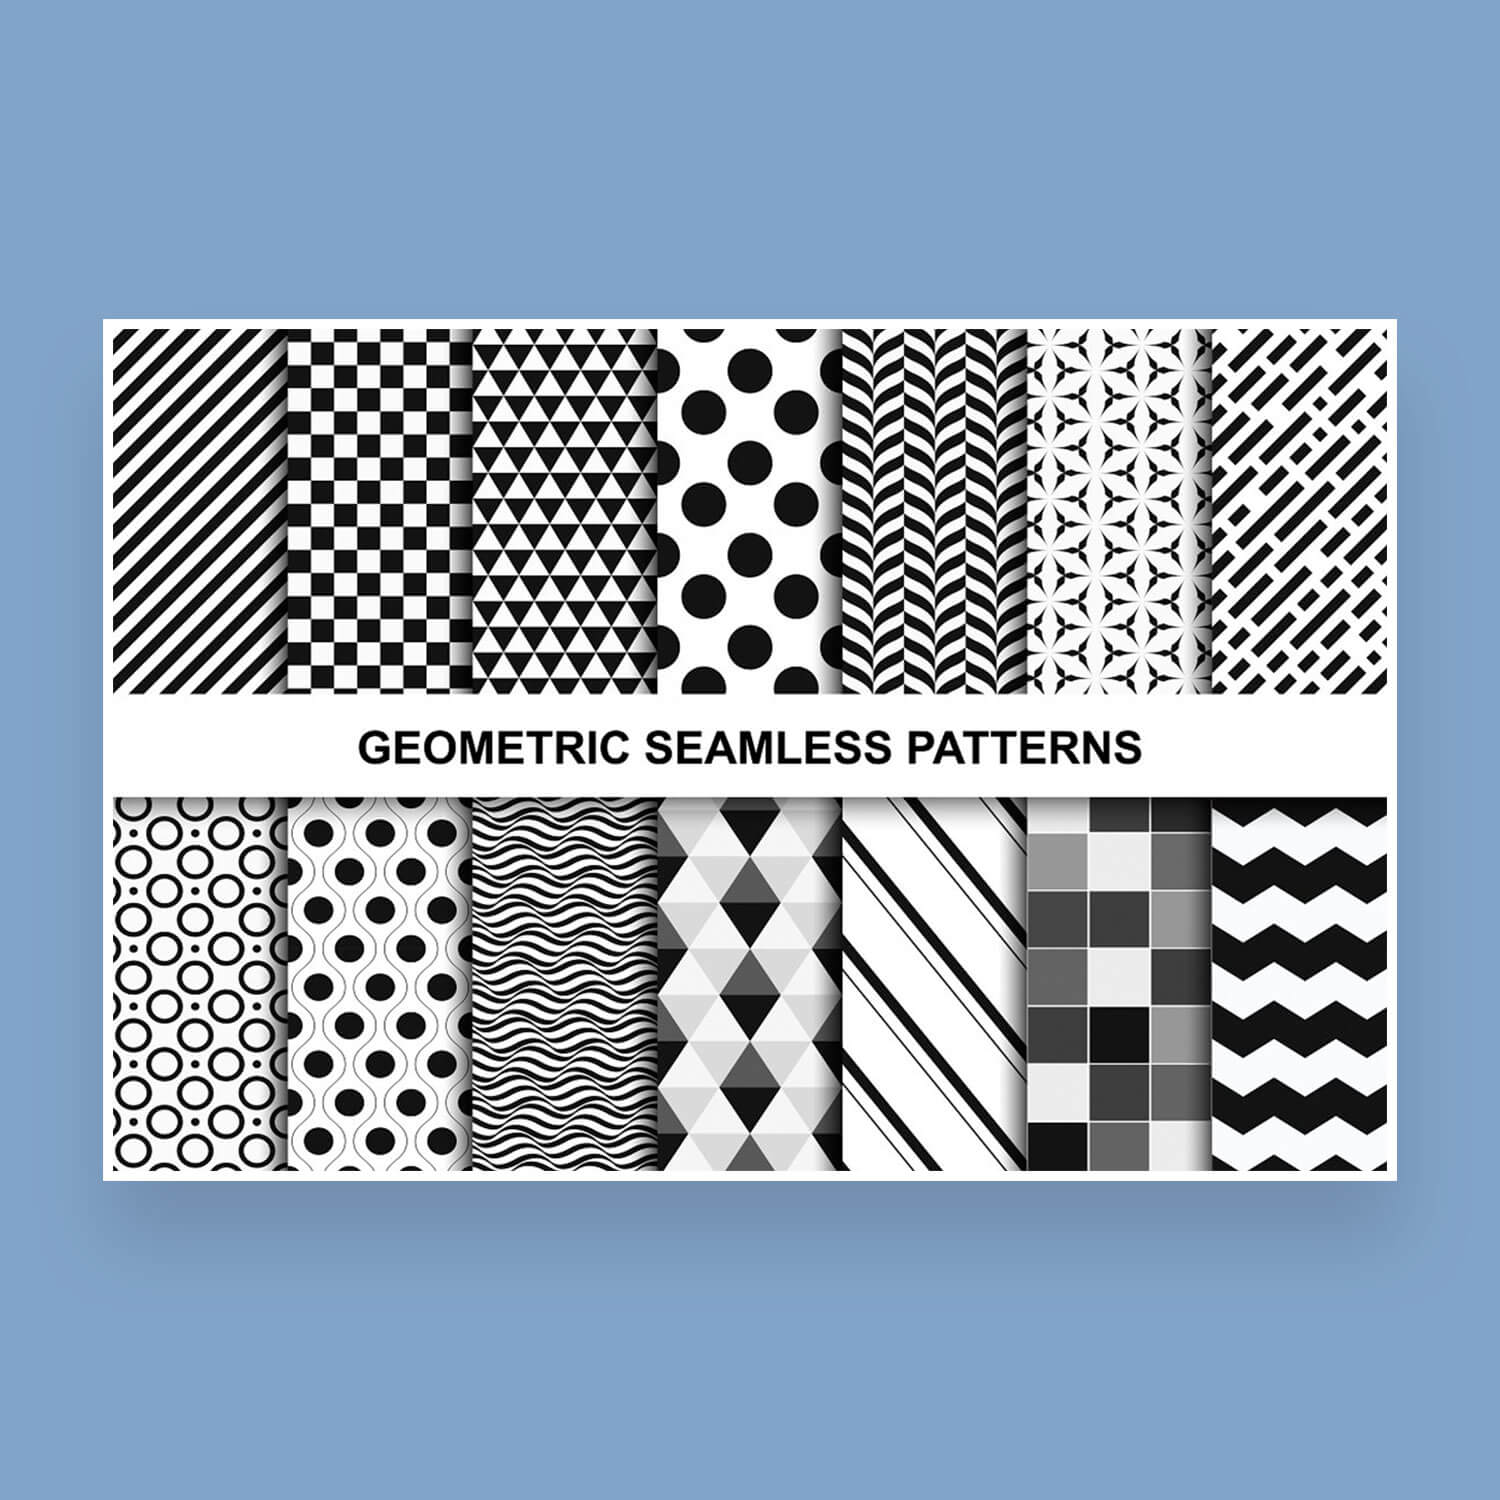 All seamless geometric patterns from this product are represented.